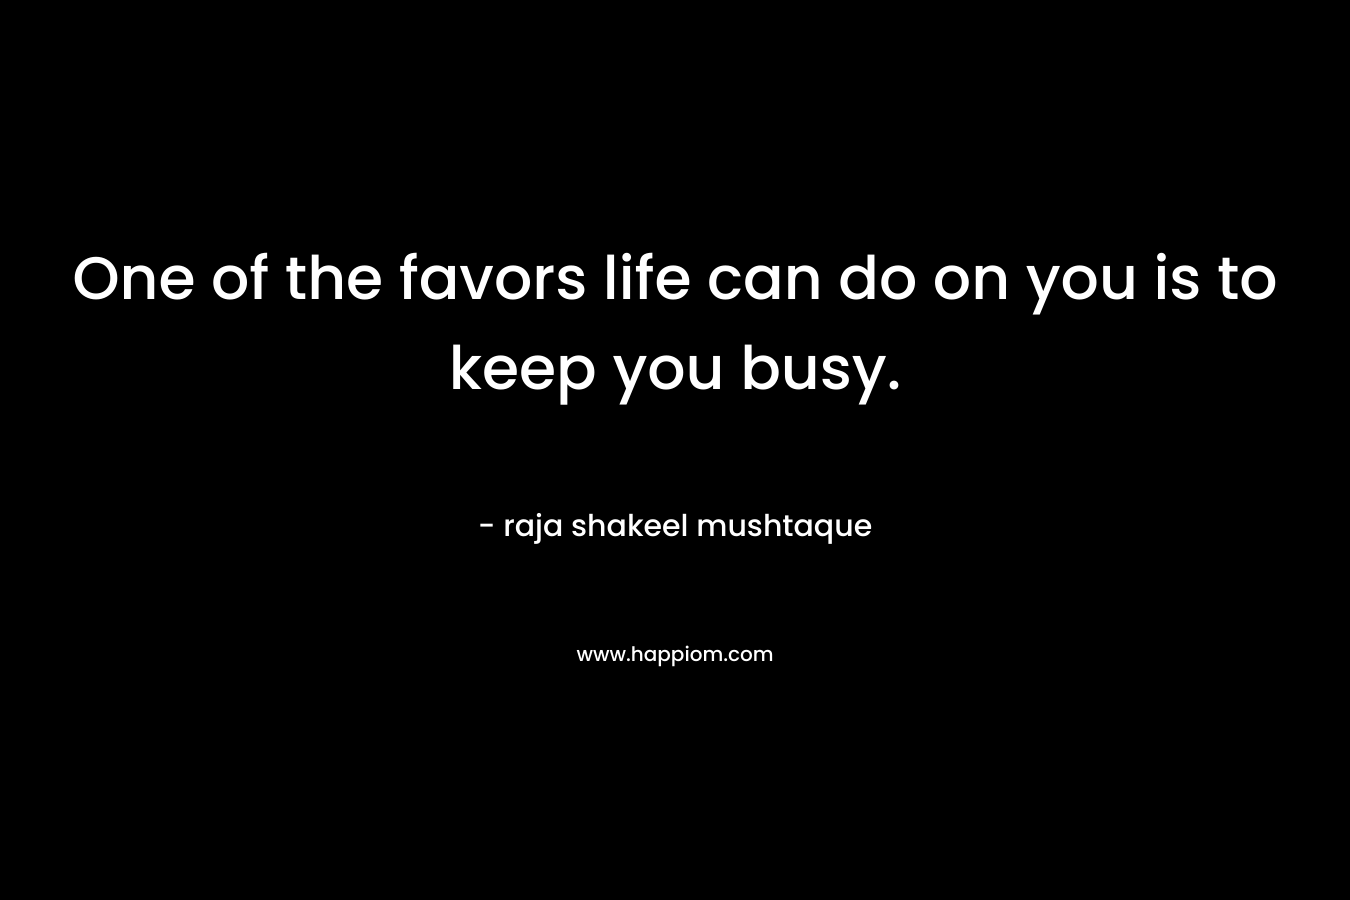 One of the favors life can do on you is to keep you busy. – raja shakeel mushtaque